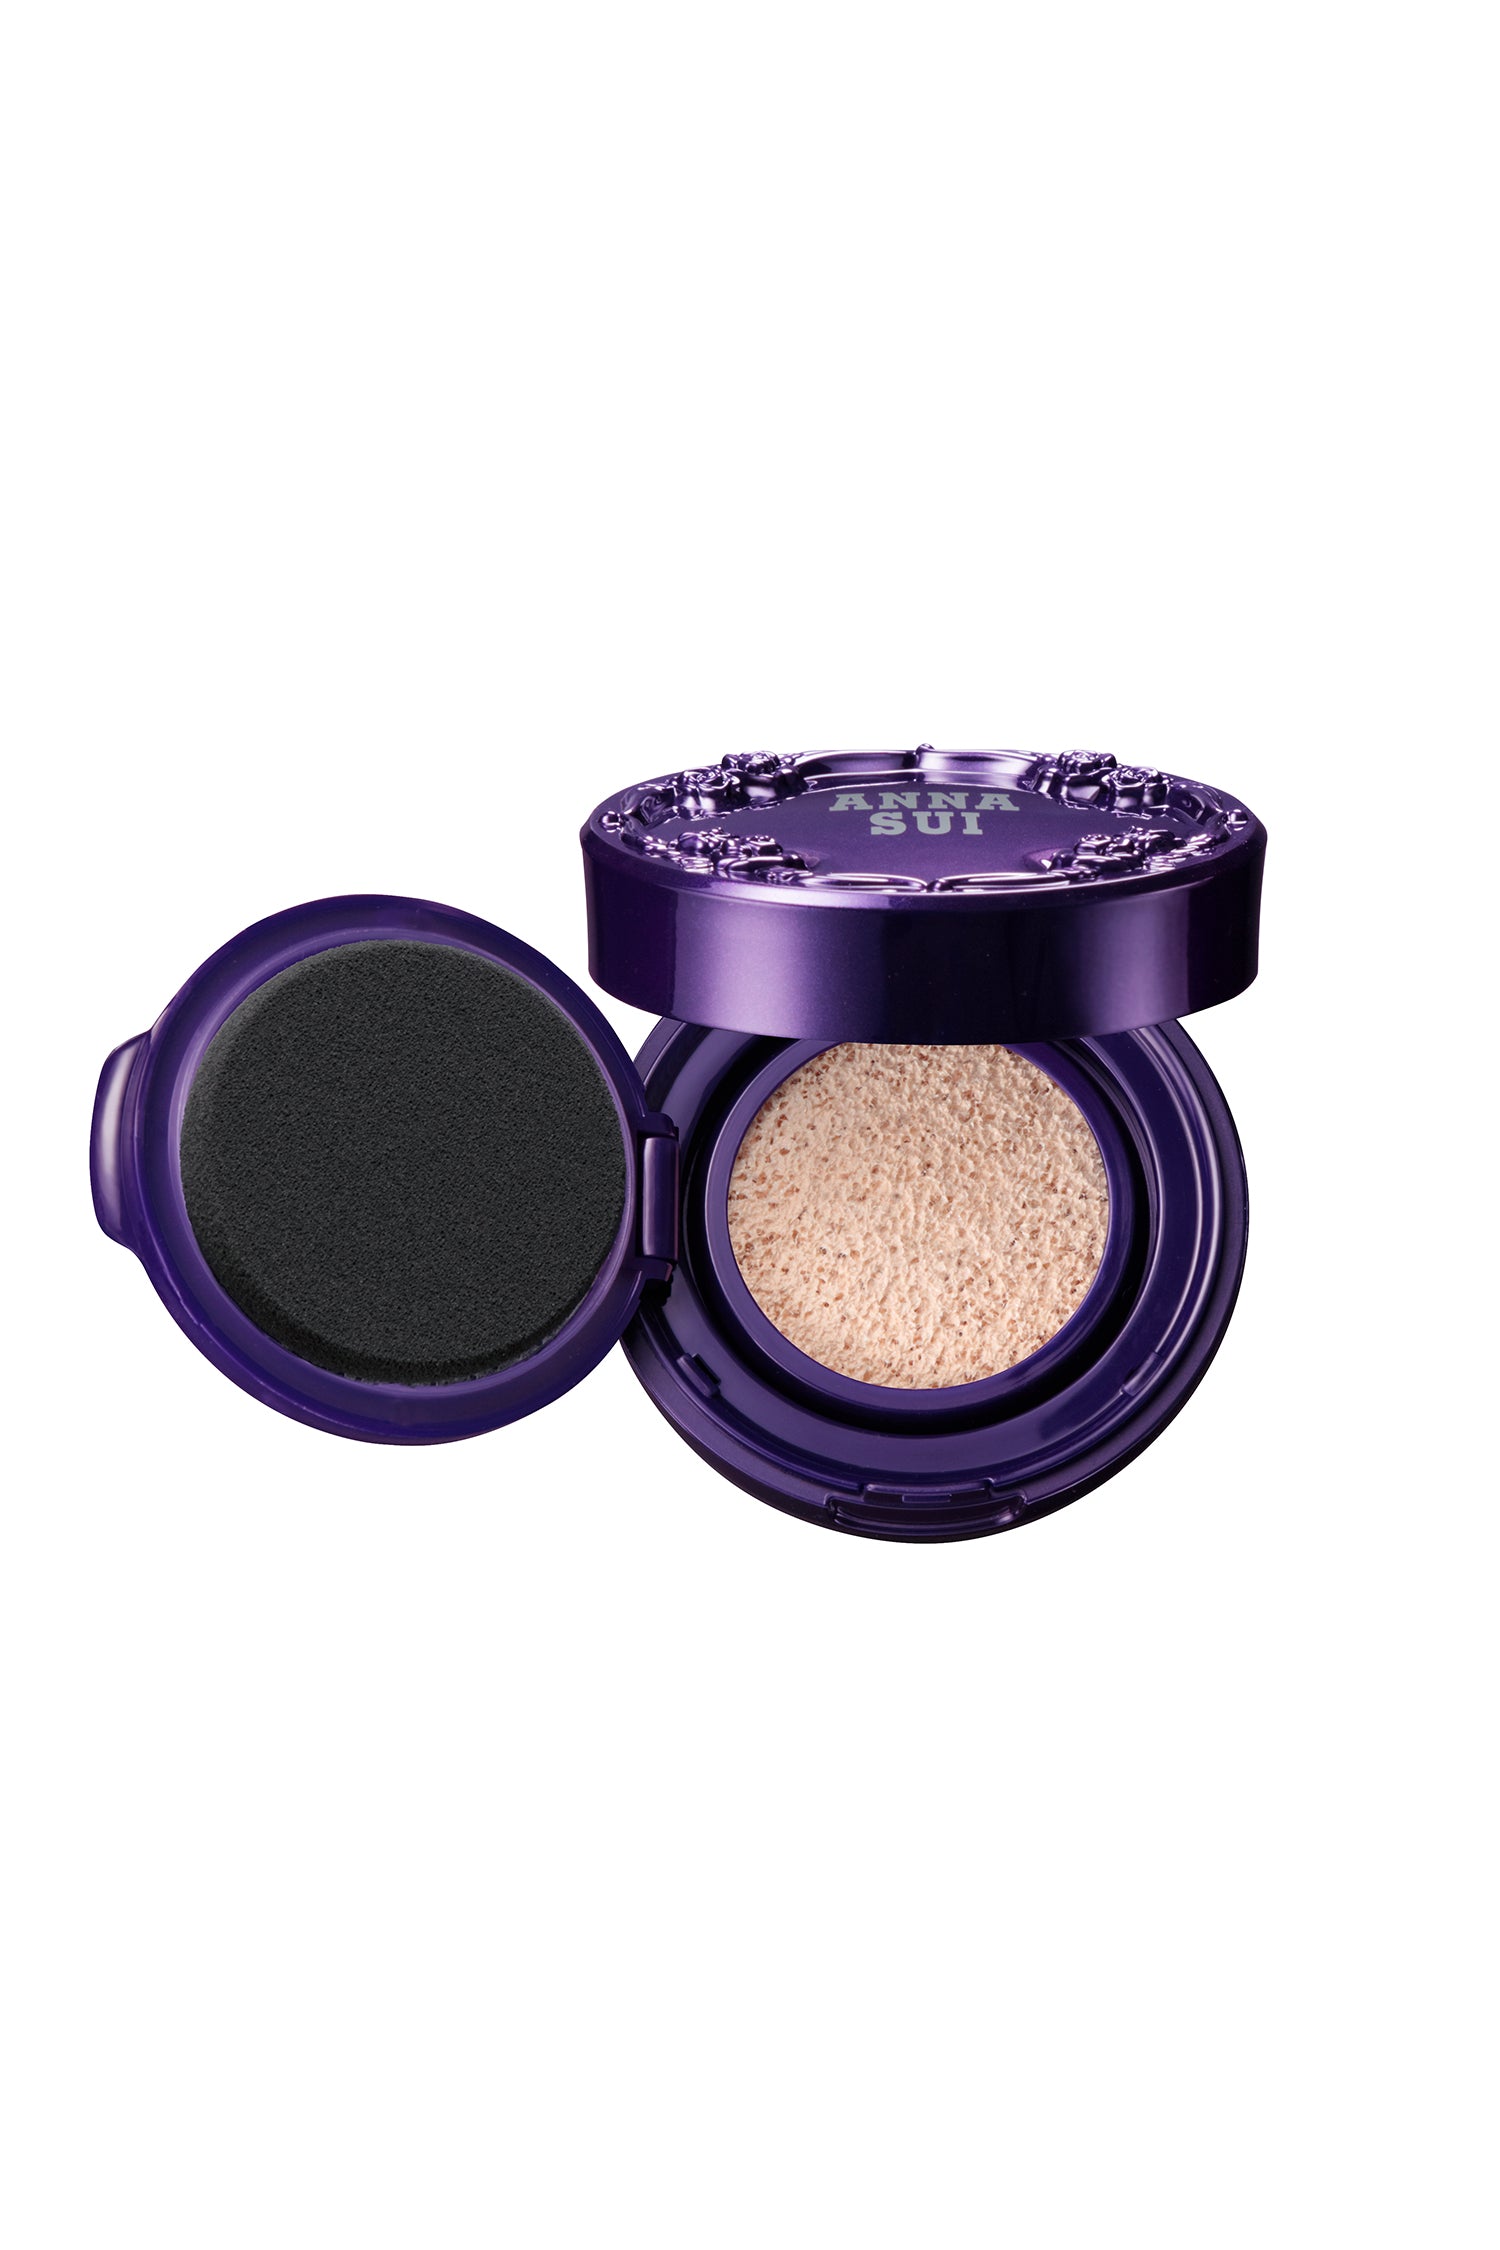 Purple round case, raised rose pattern and Anna Sui label, bottom, liquid face powder, on the left an open lid with a cushion